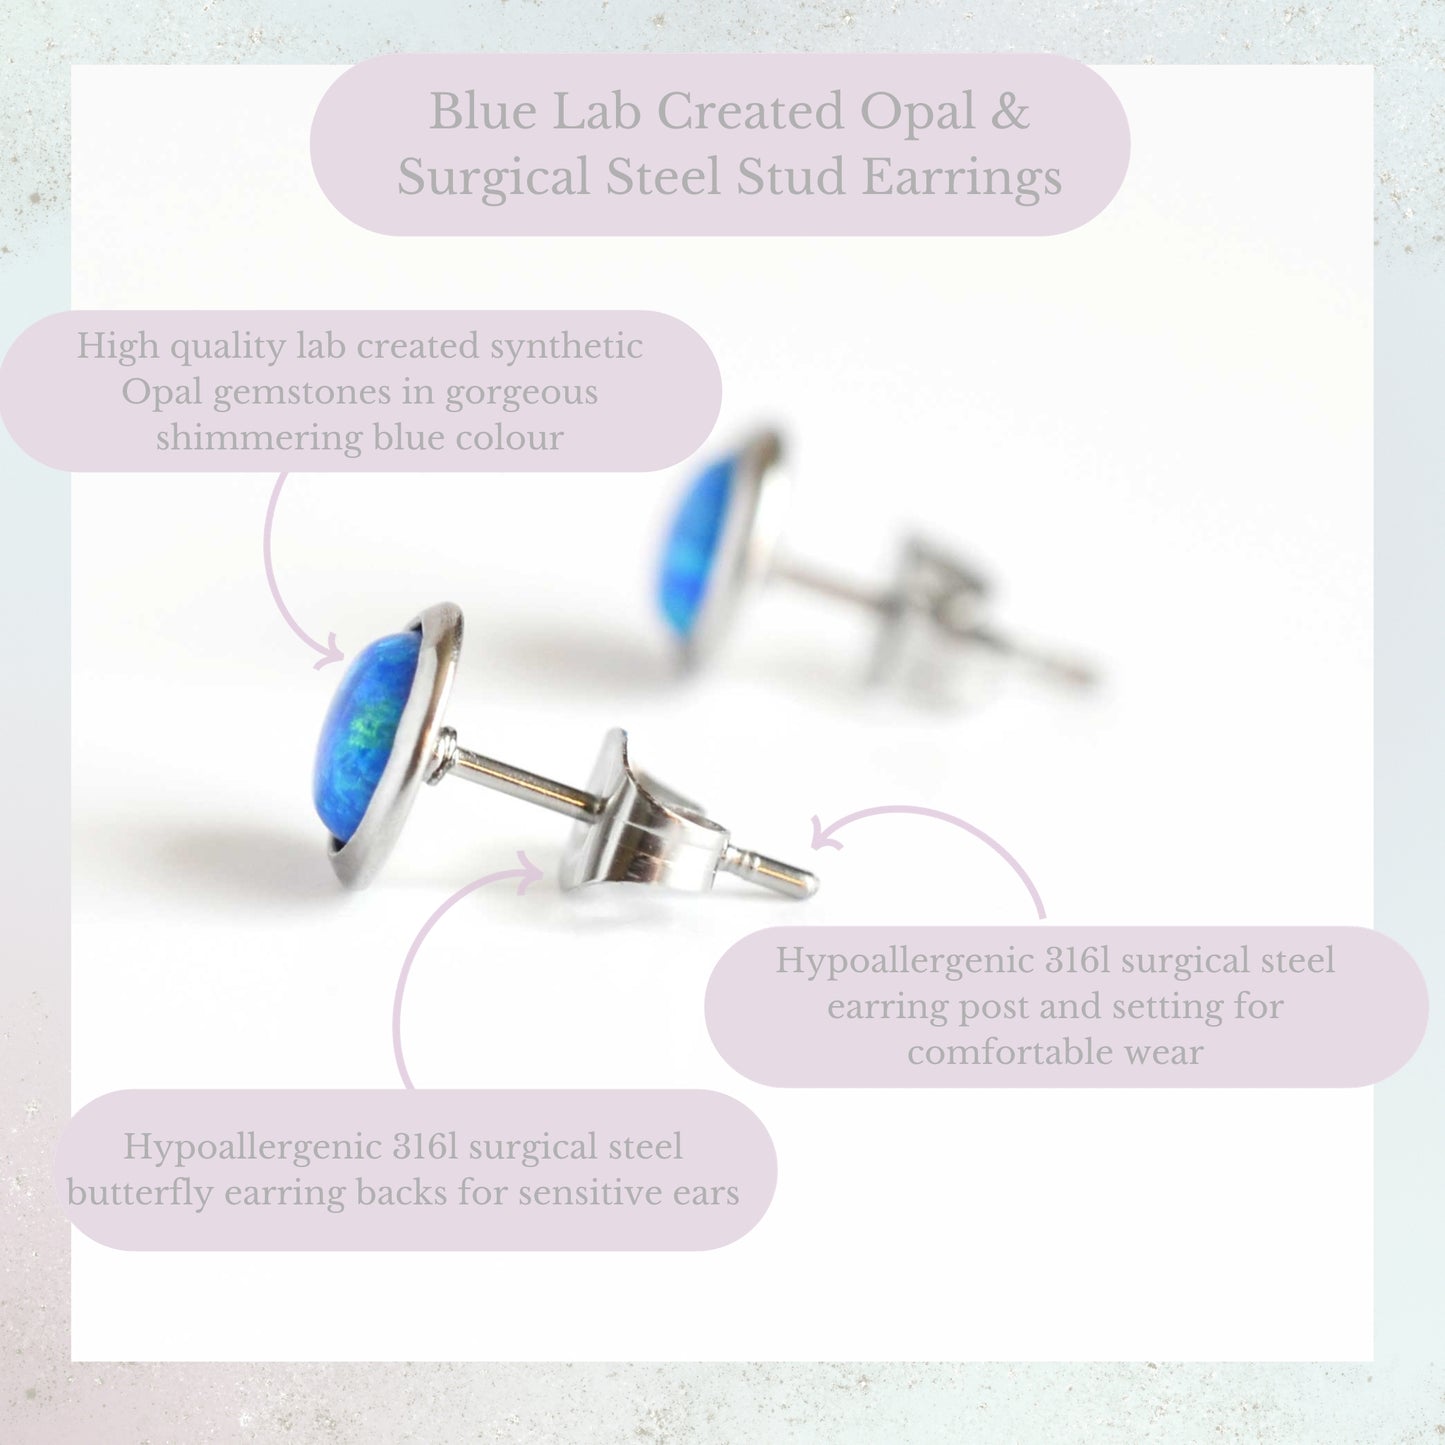 Blue Lab Created Opal & Surgical Steel Stud Earrings Product Information Graphic